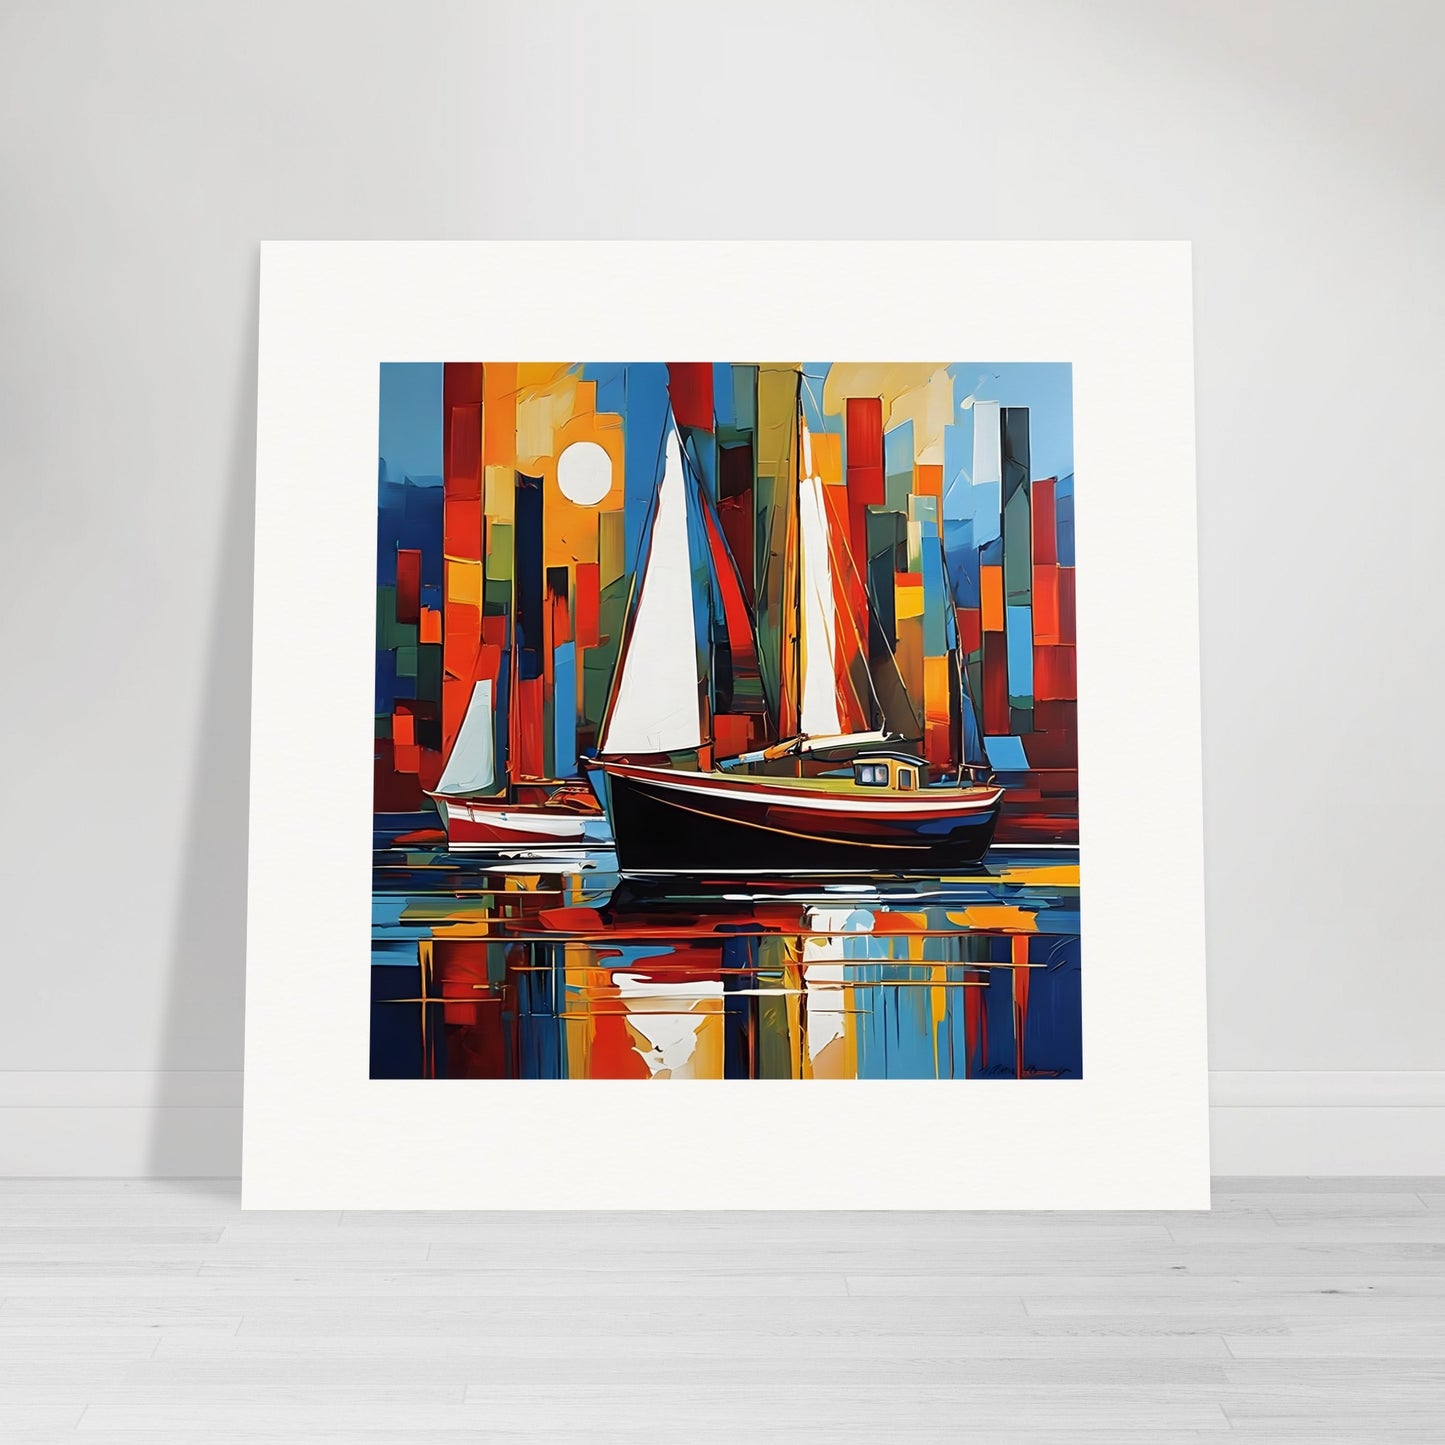 Affiche IA - Expressionisme abstract canadien, Bateau - 596688742